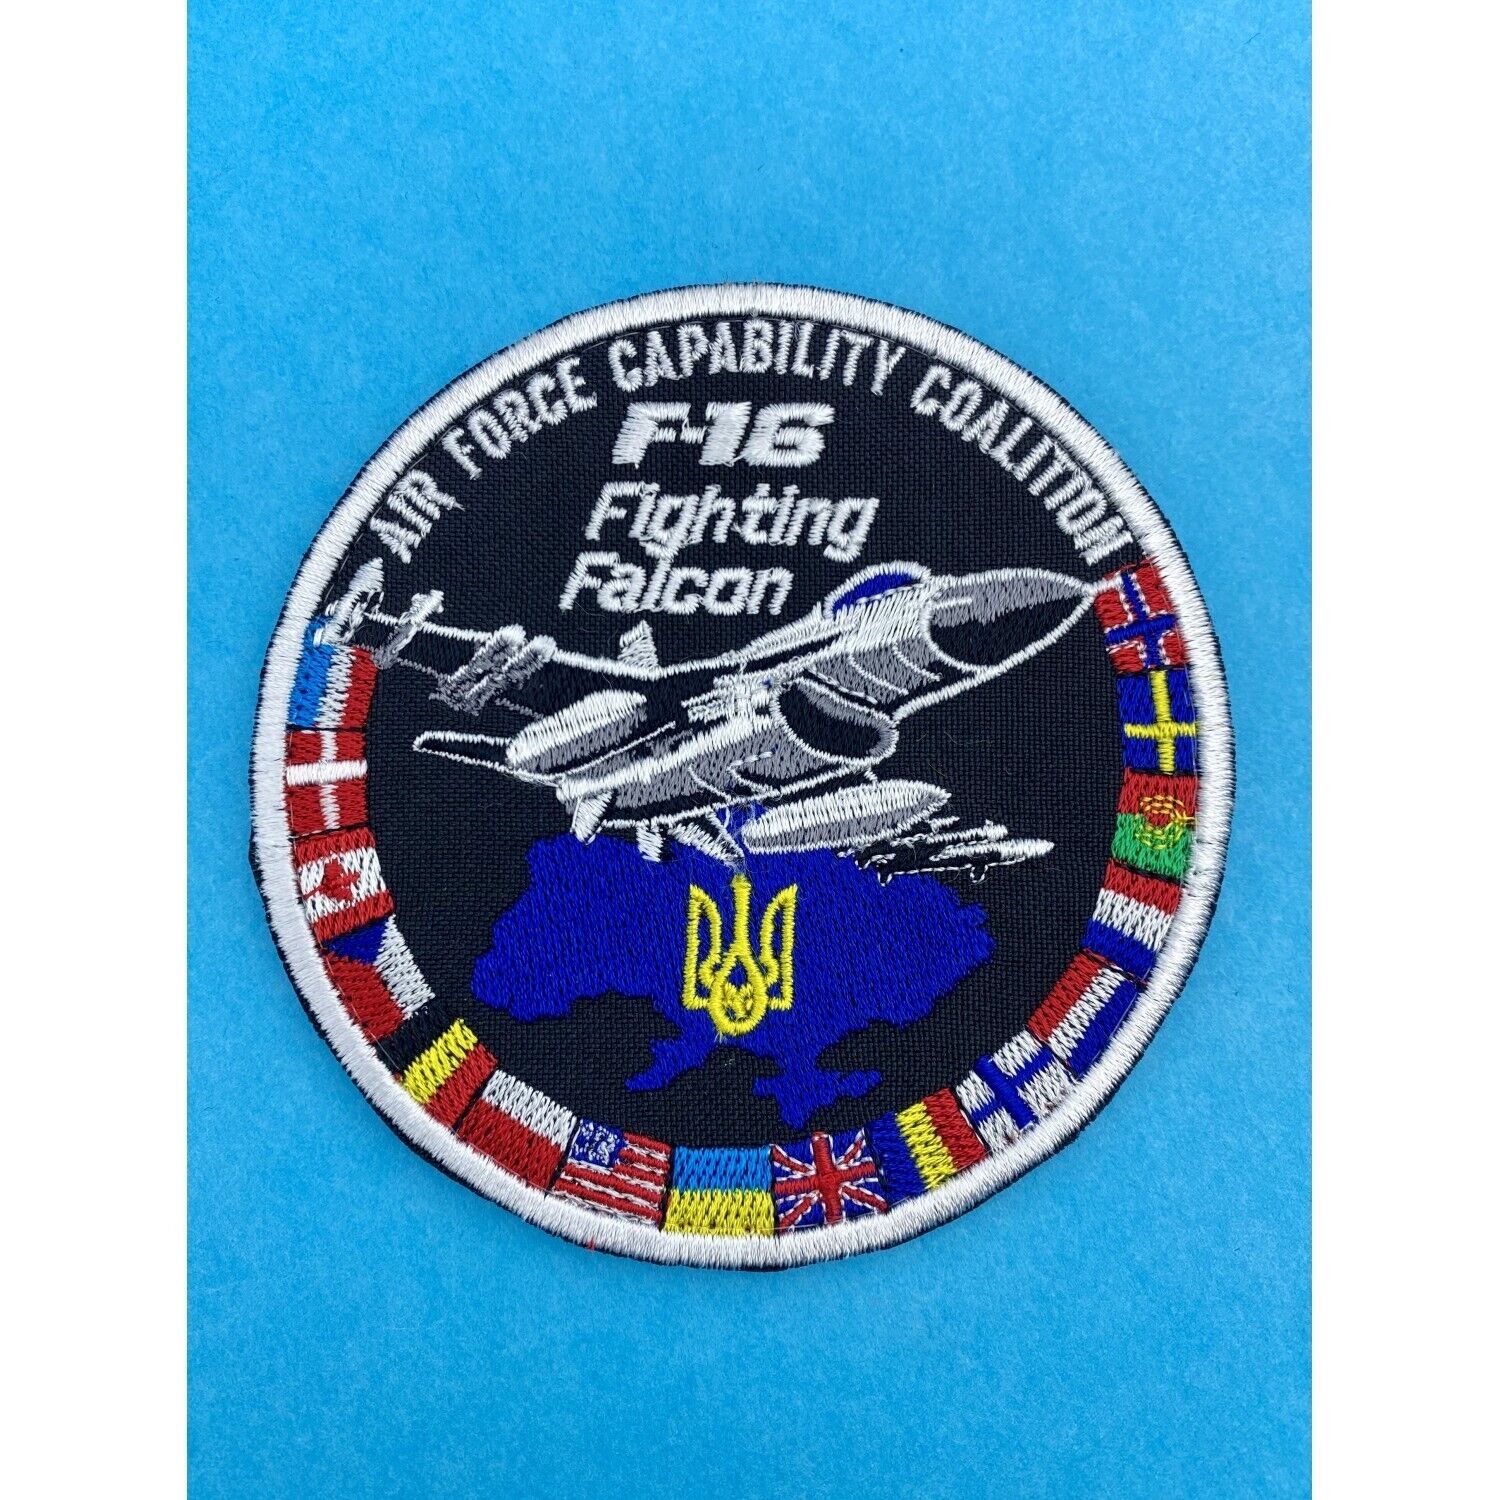 F-16 Air Force Capability Coalition Patch Army Patch